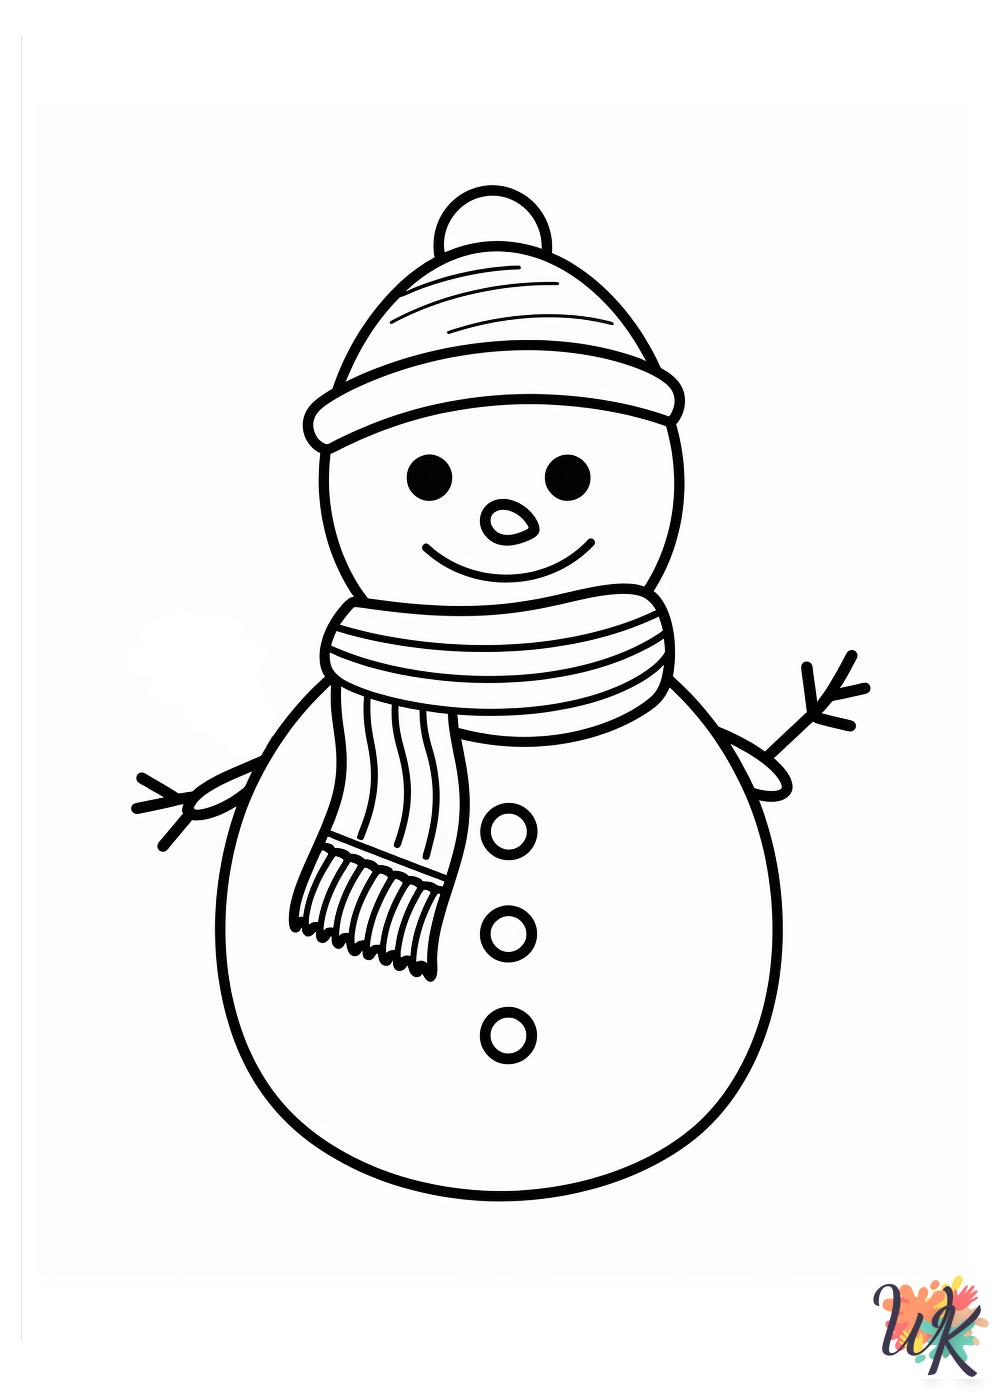 Snowman coloring pages printable 1